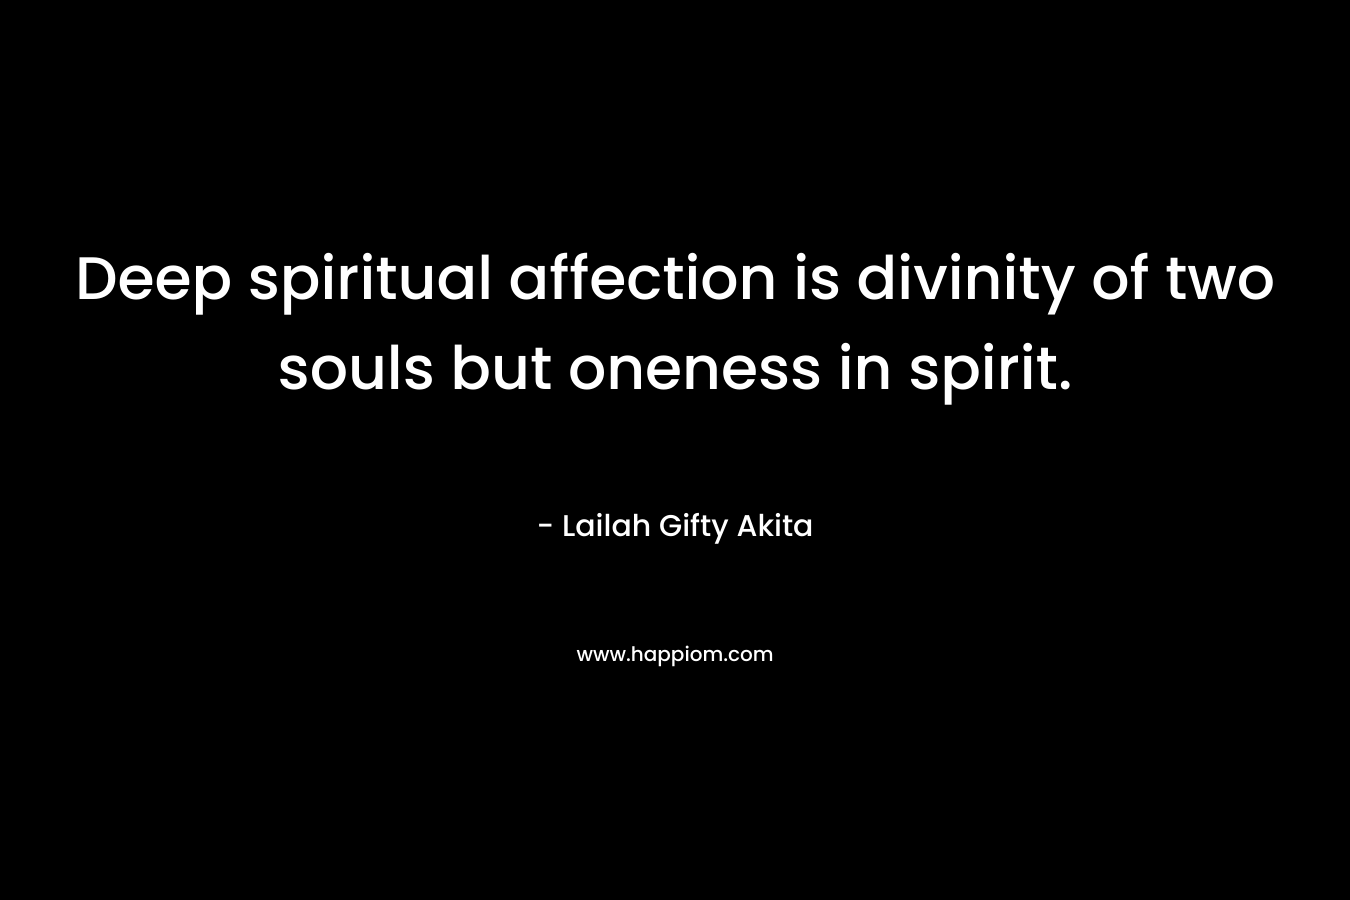 Deep spiritual affection is divinity of two souls but oneness in spirit.